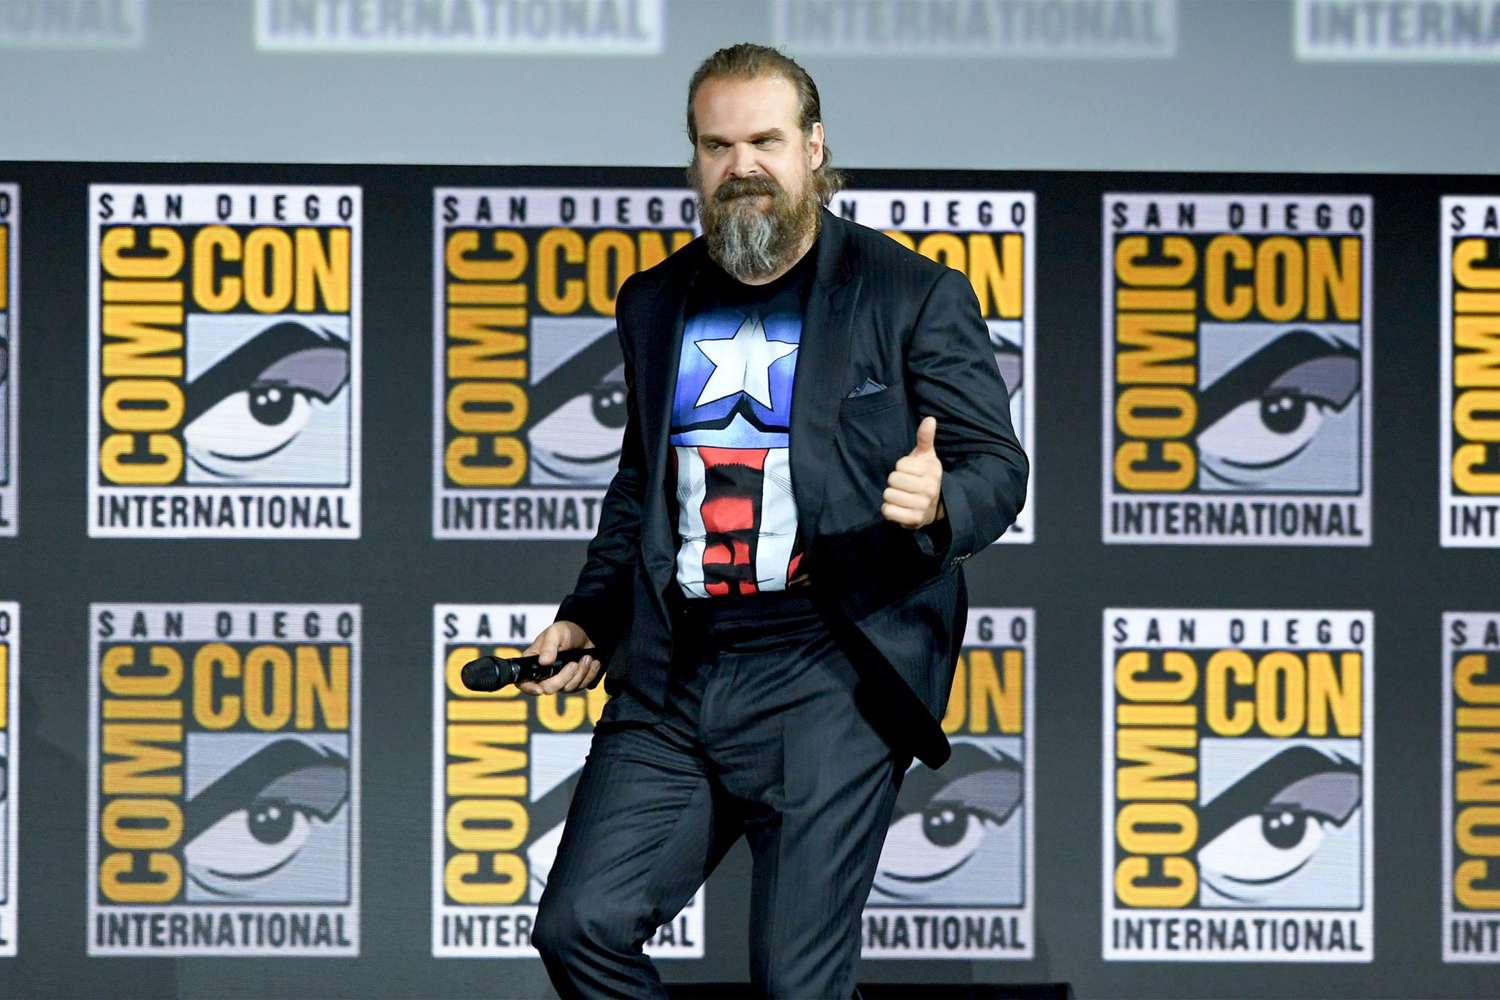 SAN DIEGO, CALIFORNIA - JULY 20: David Harbour speaks at the Marvel Studios Panel during 2019 Comic-Con International at San Diego Convention Center on July 20, 2019 in San Diego, California. (Photo by Kevin Winter/Getty Images)